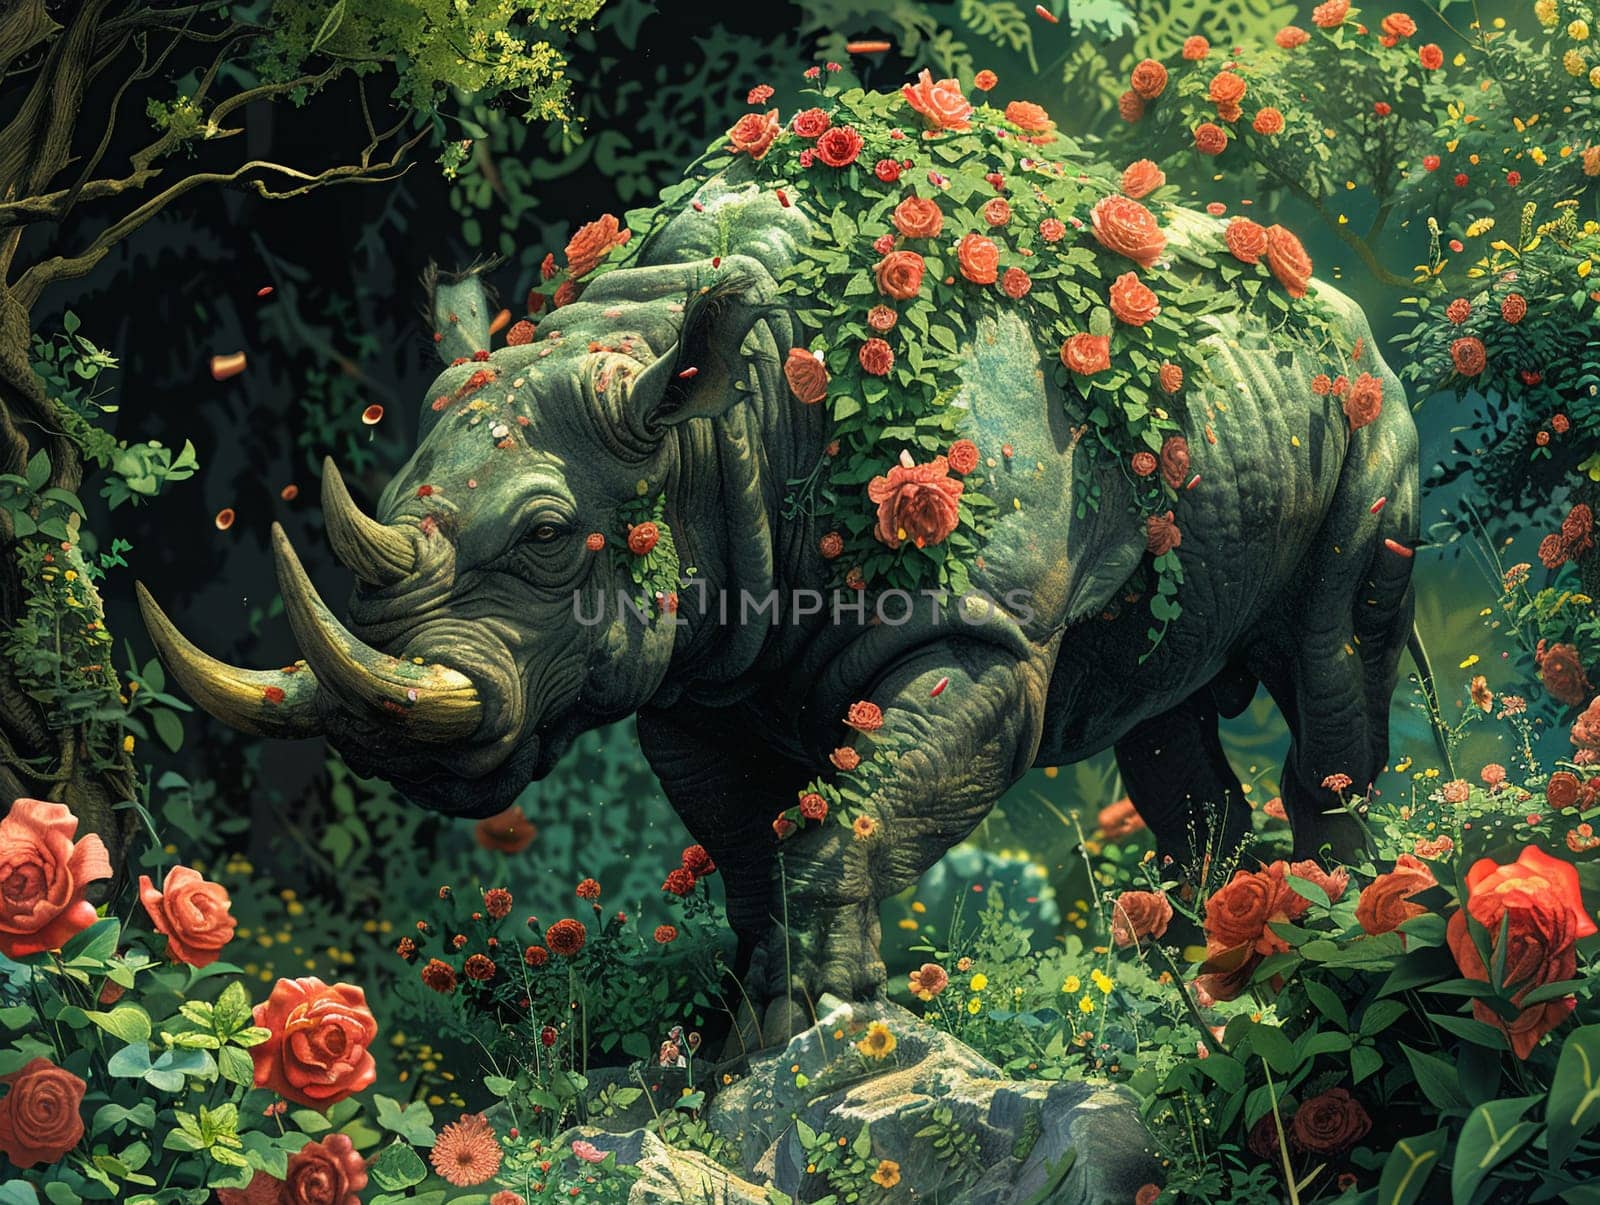 Animal kingdom reimagined with fantastical beasts in a lush by Benzoix